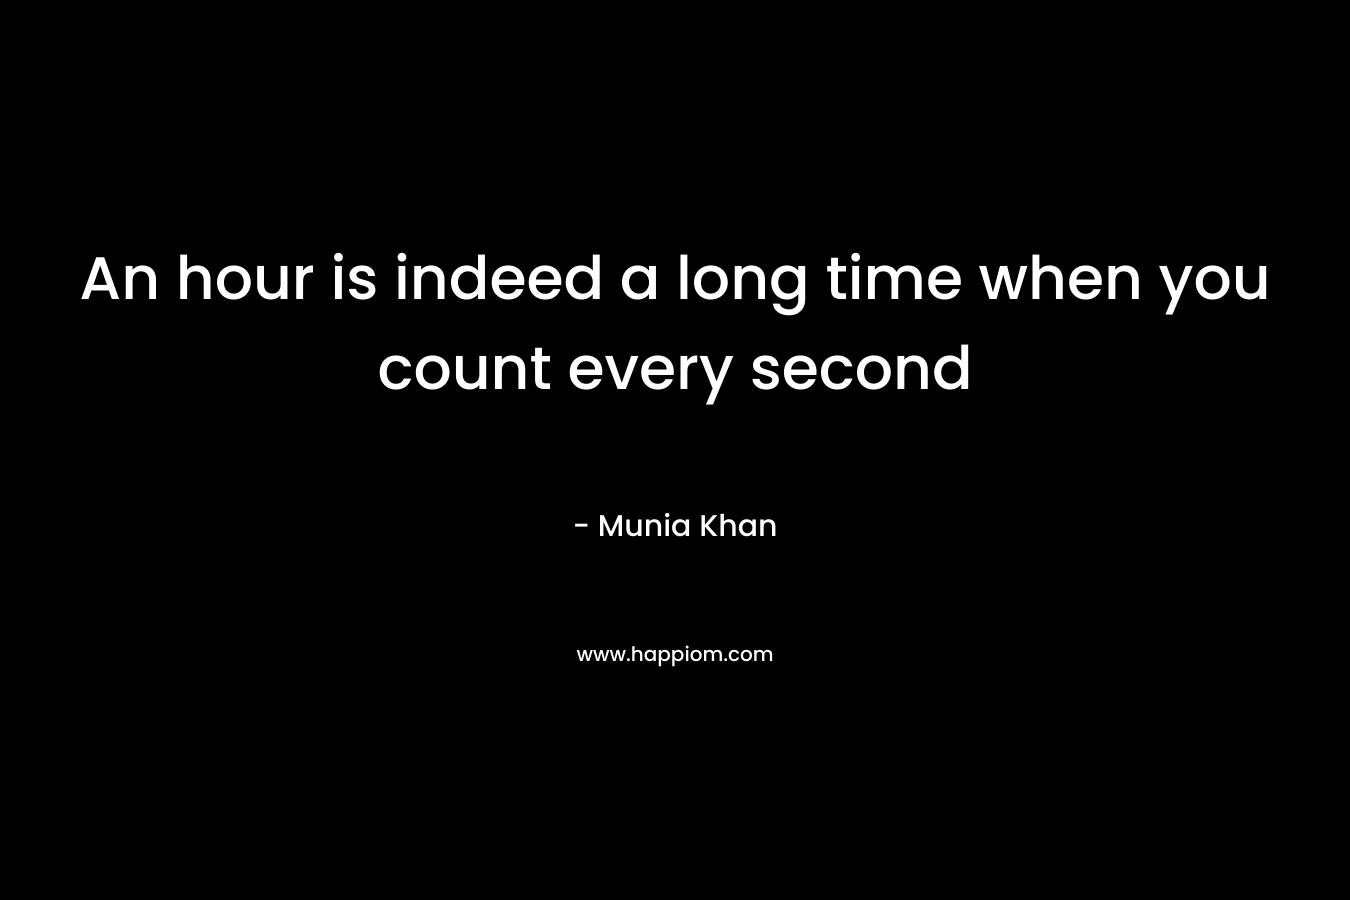 An hour is indeed a long time when you count every second